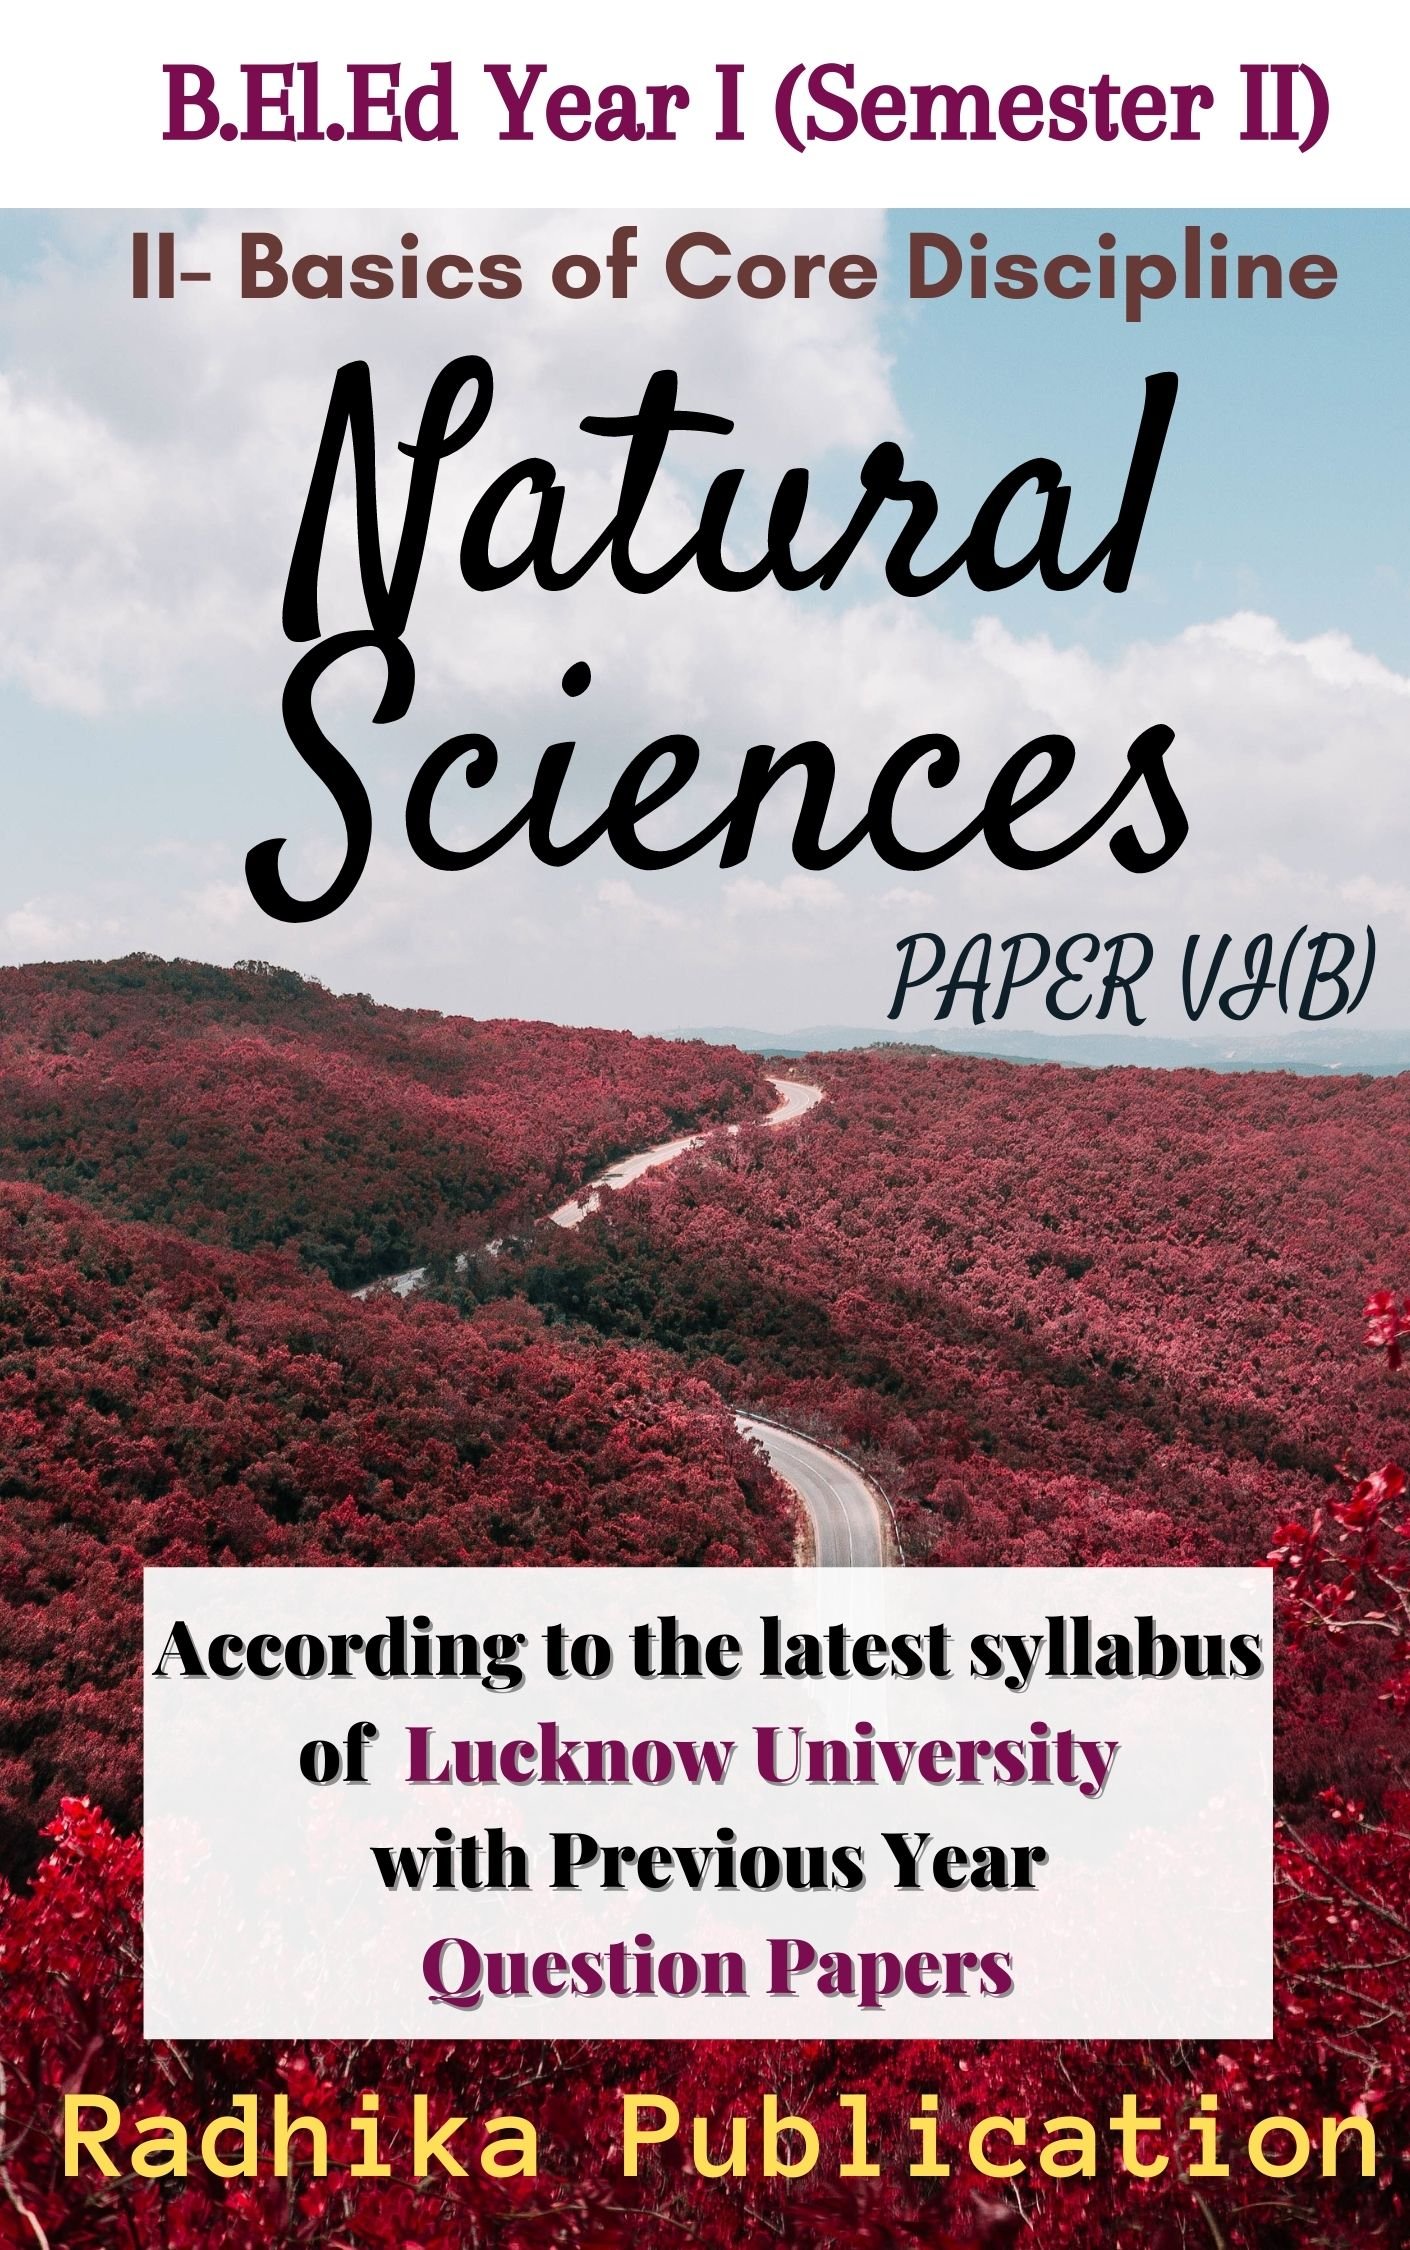 NATURAL SCIENCE LU FRONT COVER